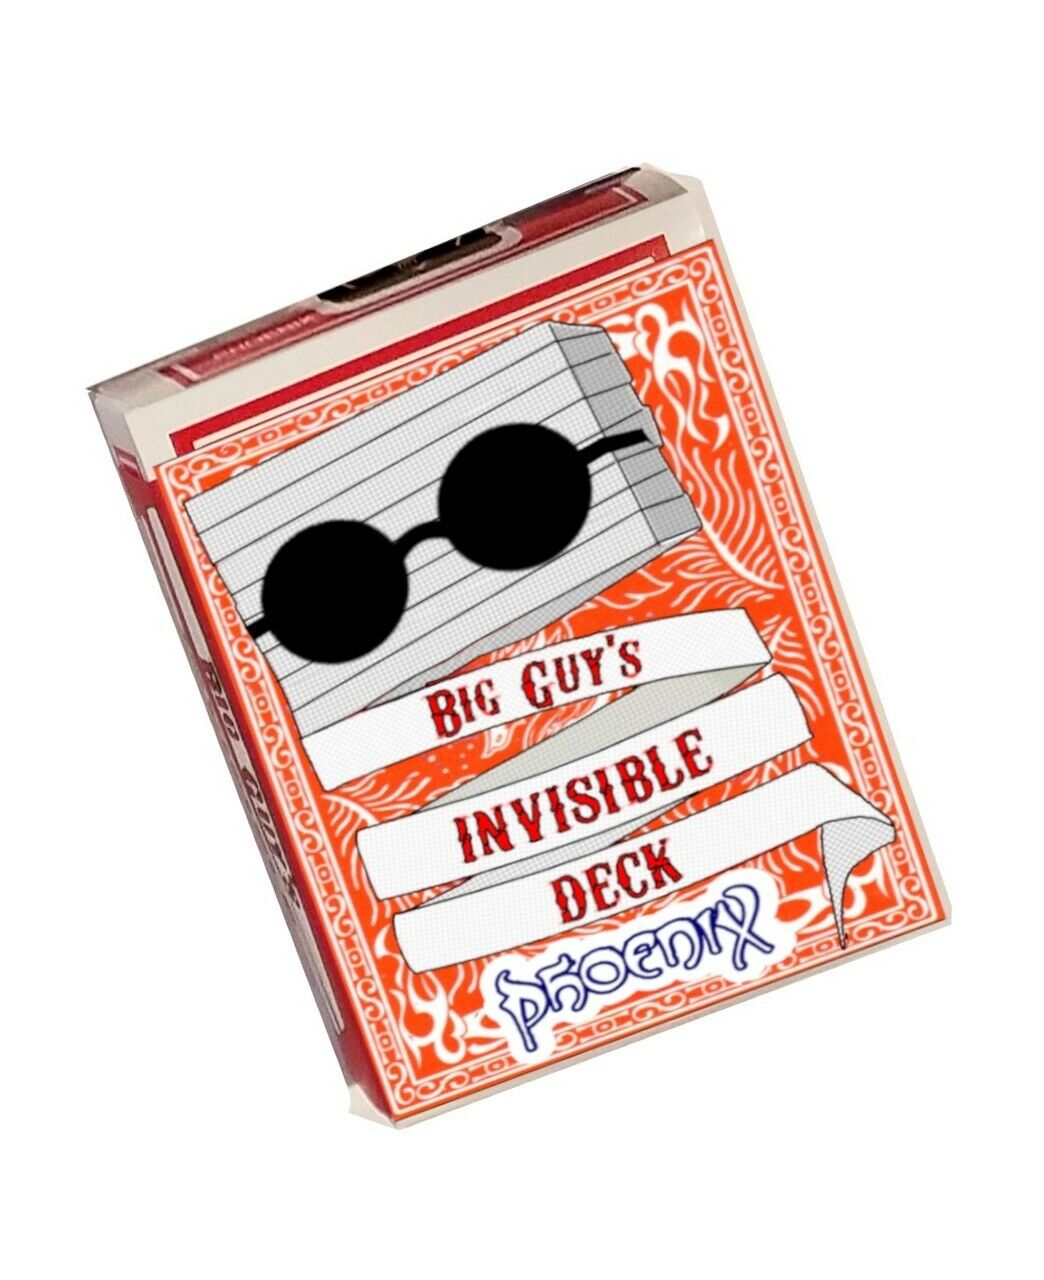 Big Guy’s Invisible Deck - Phoenix (Red) by Big Guy’s Magic